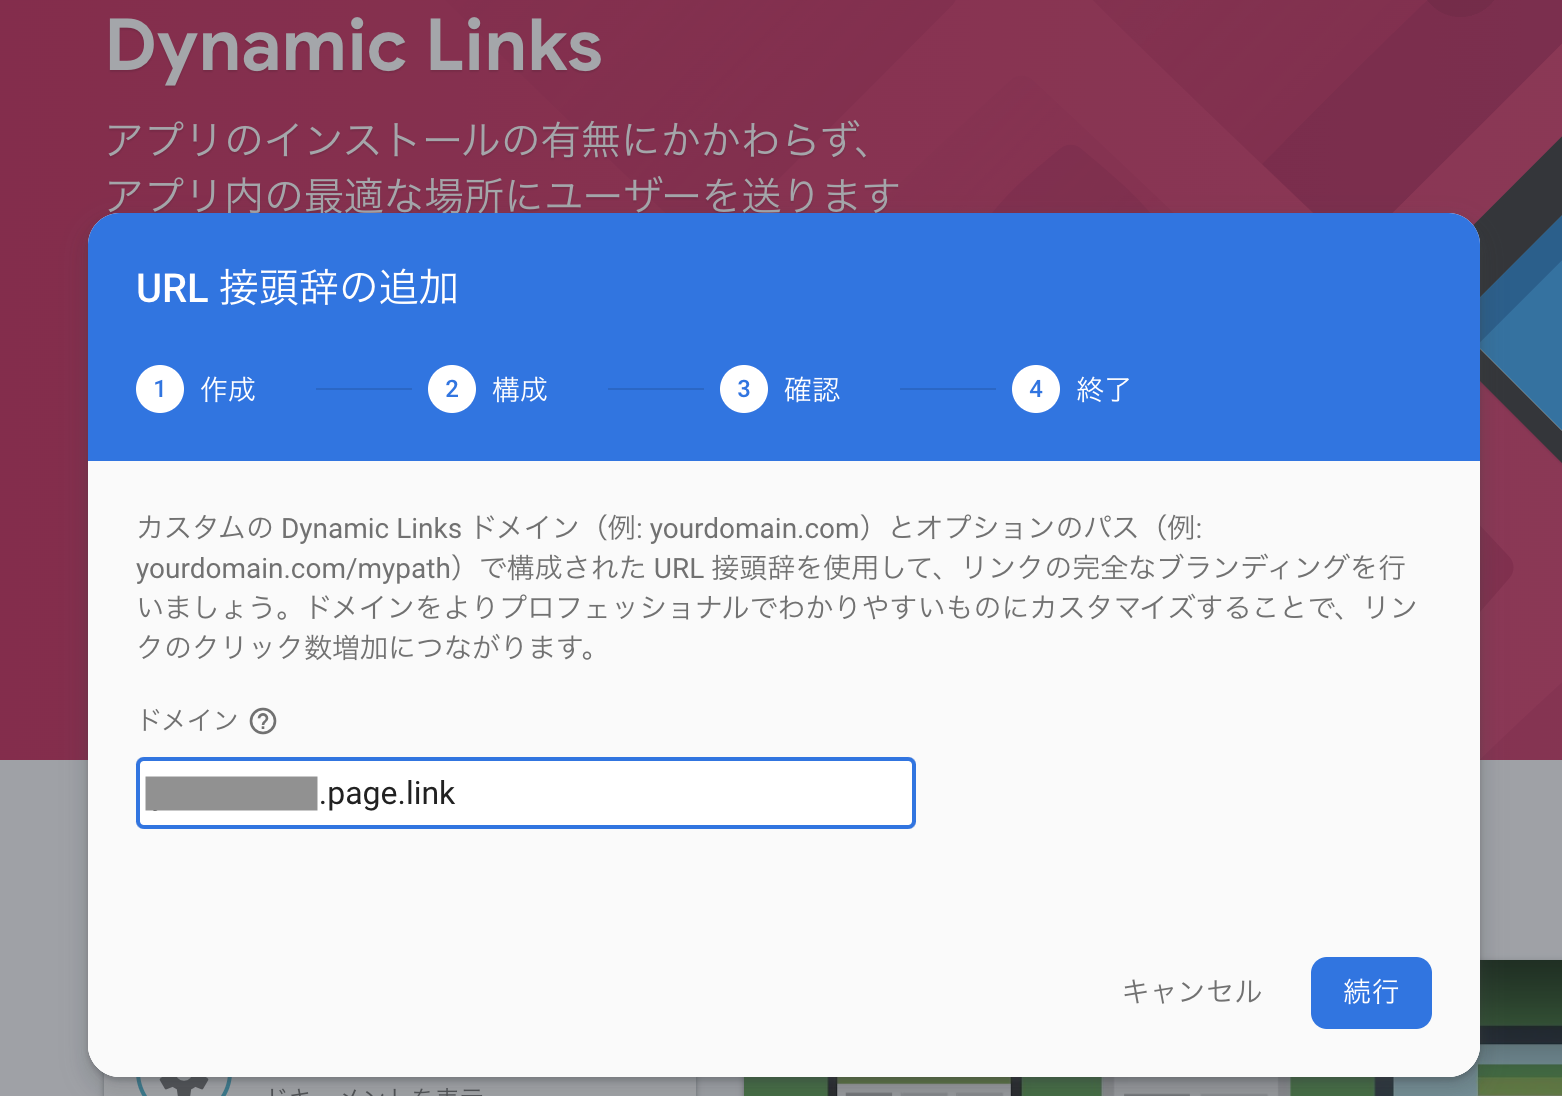 DynamicLinks_1_2.png